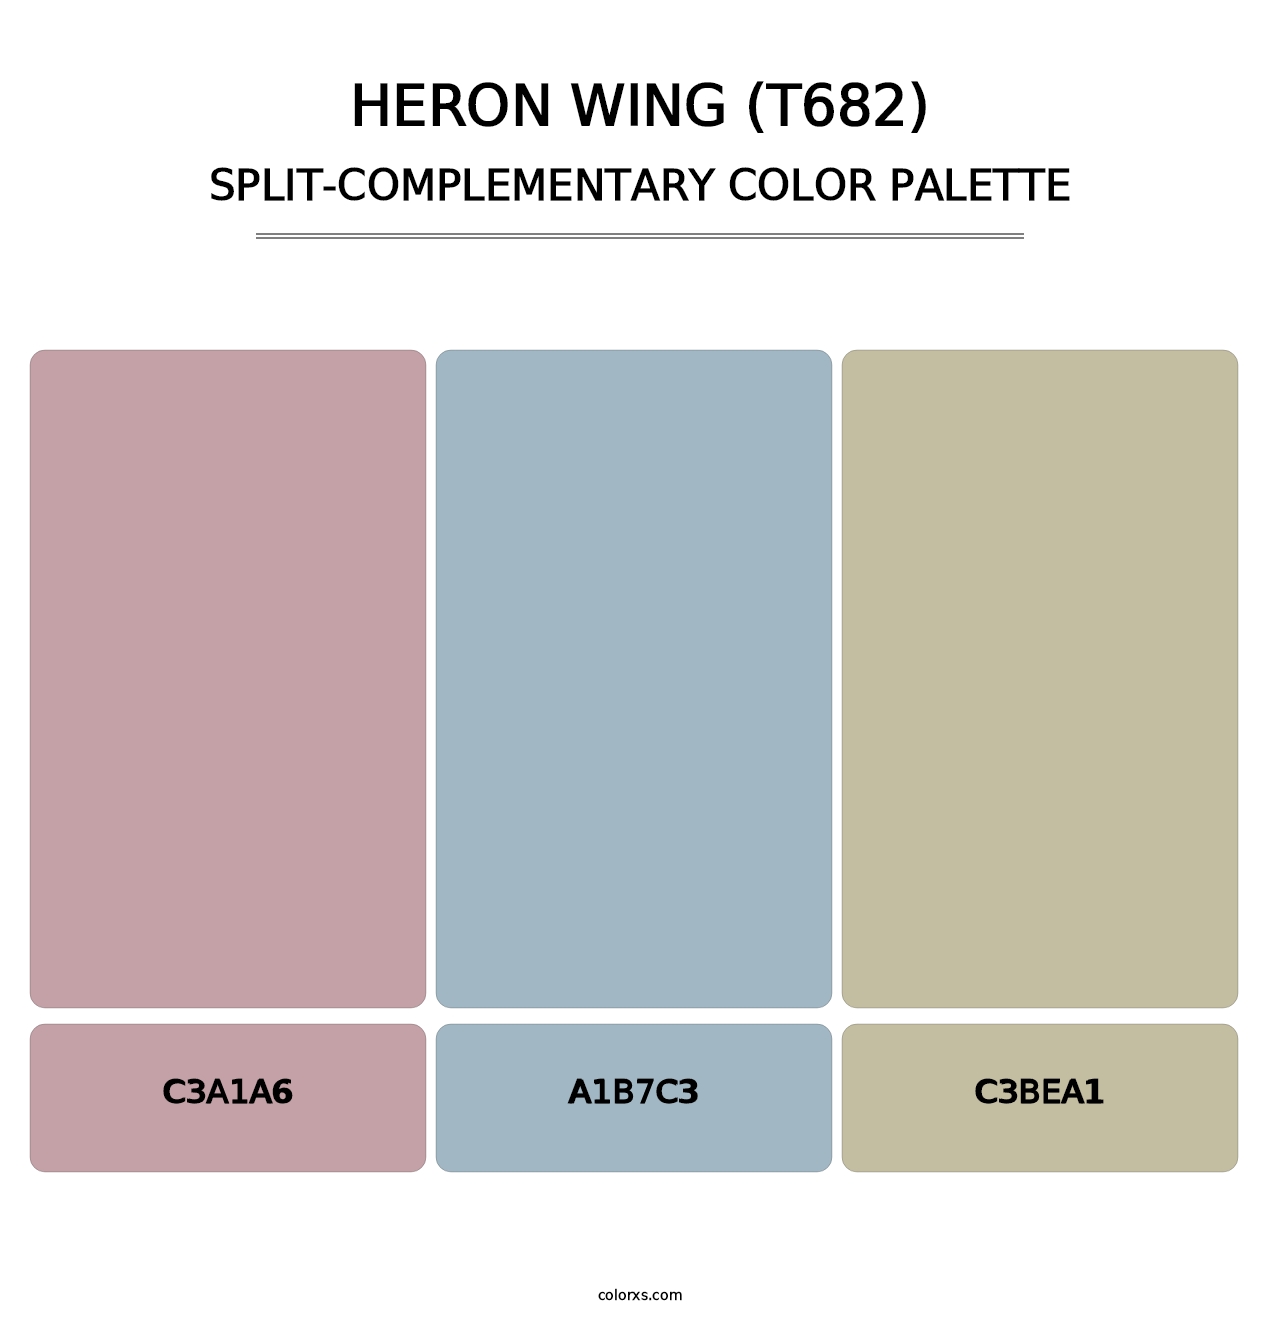 Heron Wing (T682) - Split-Complementary Color Palette